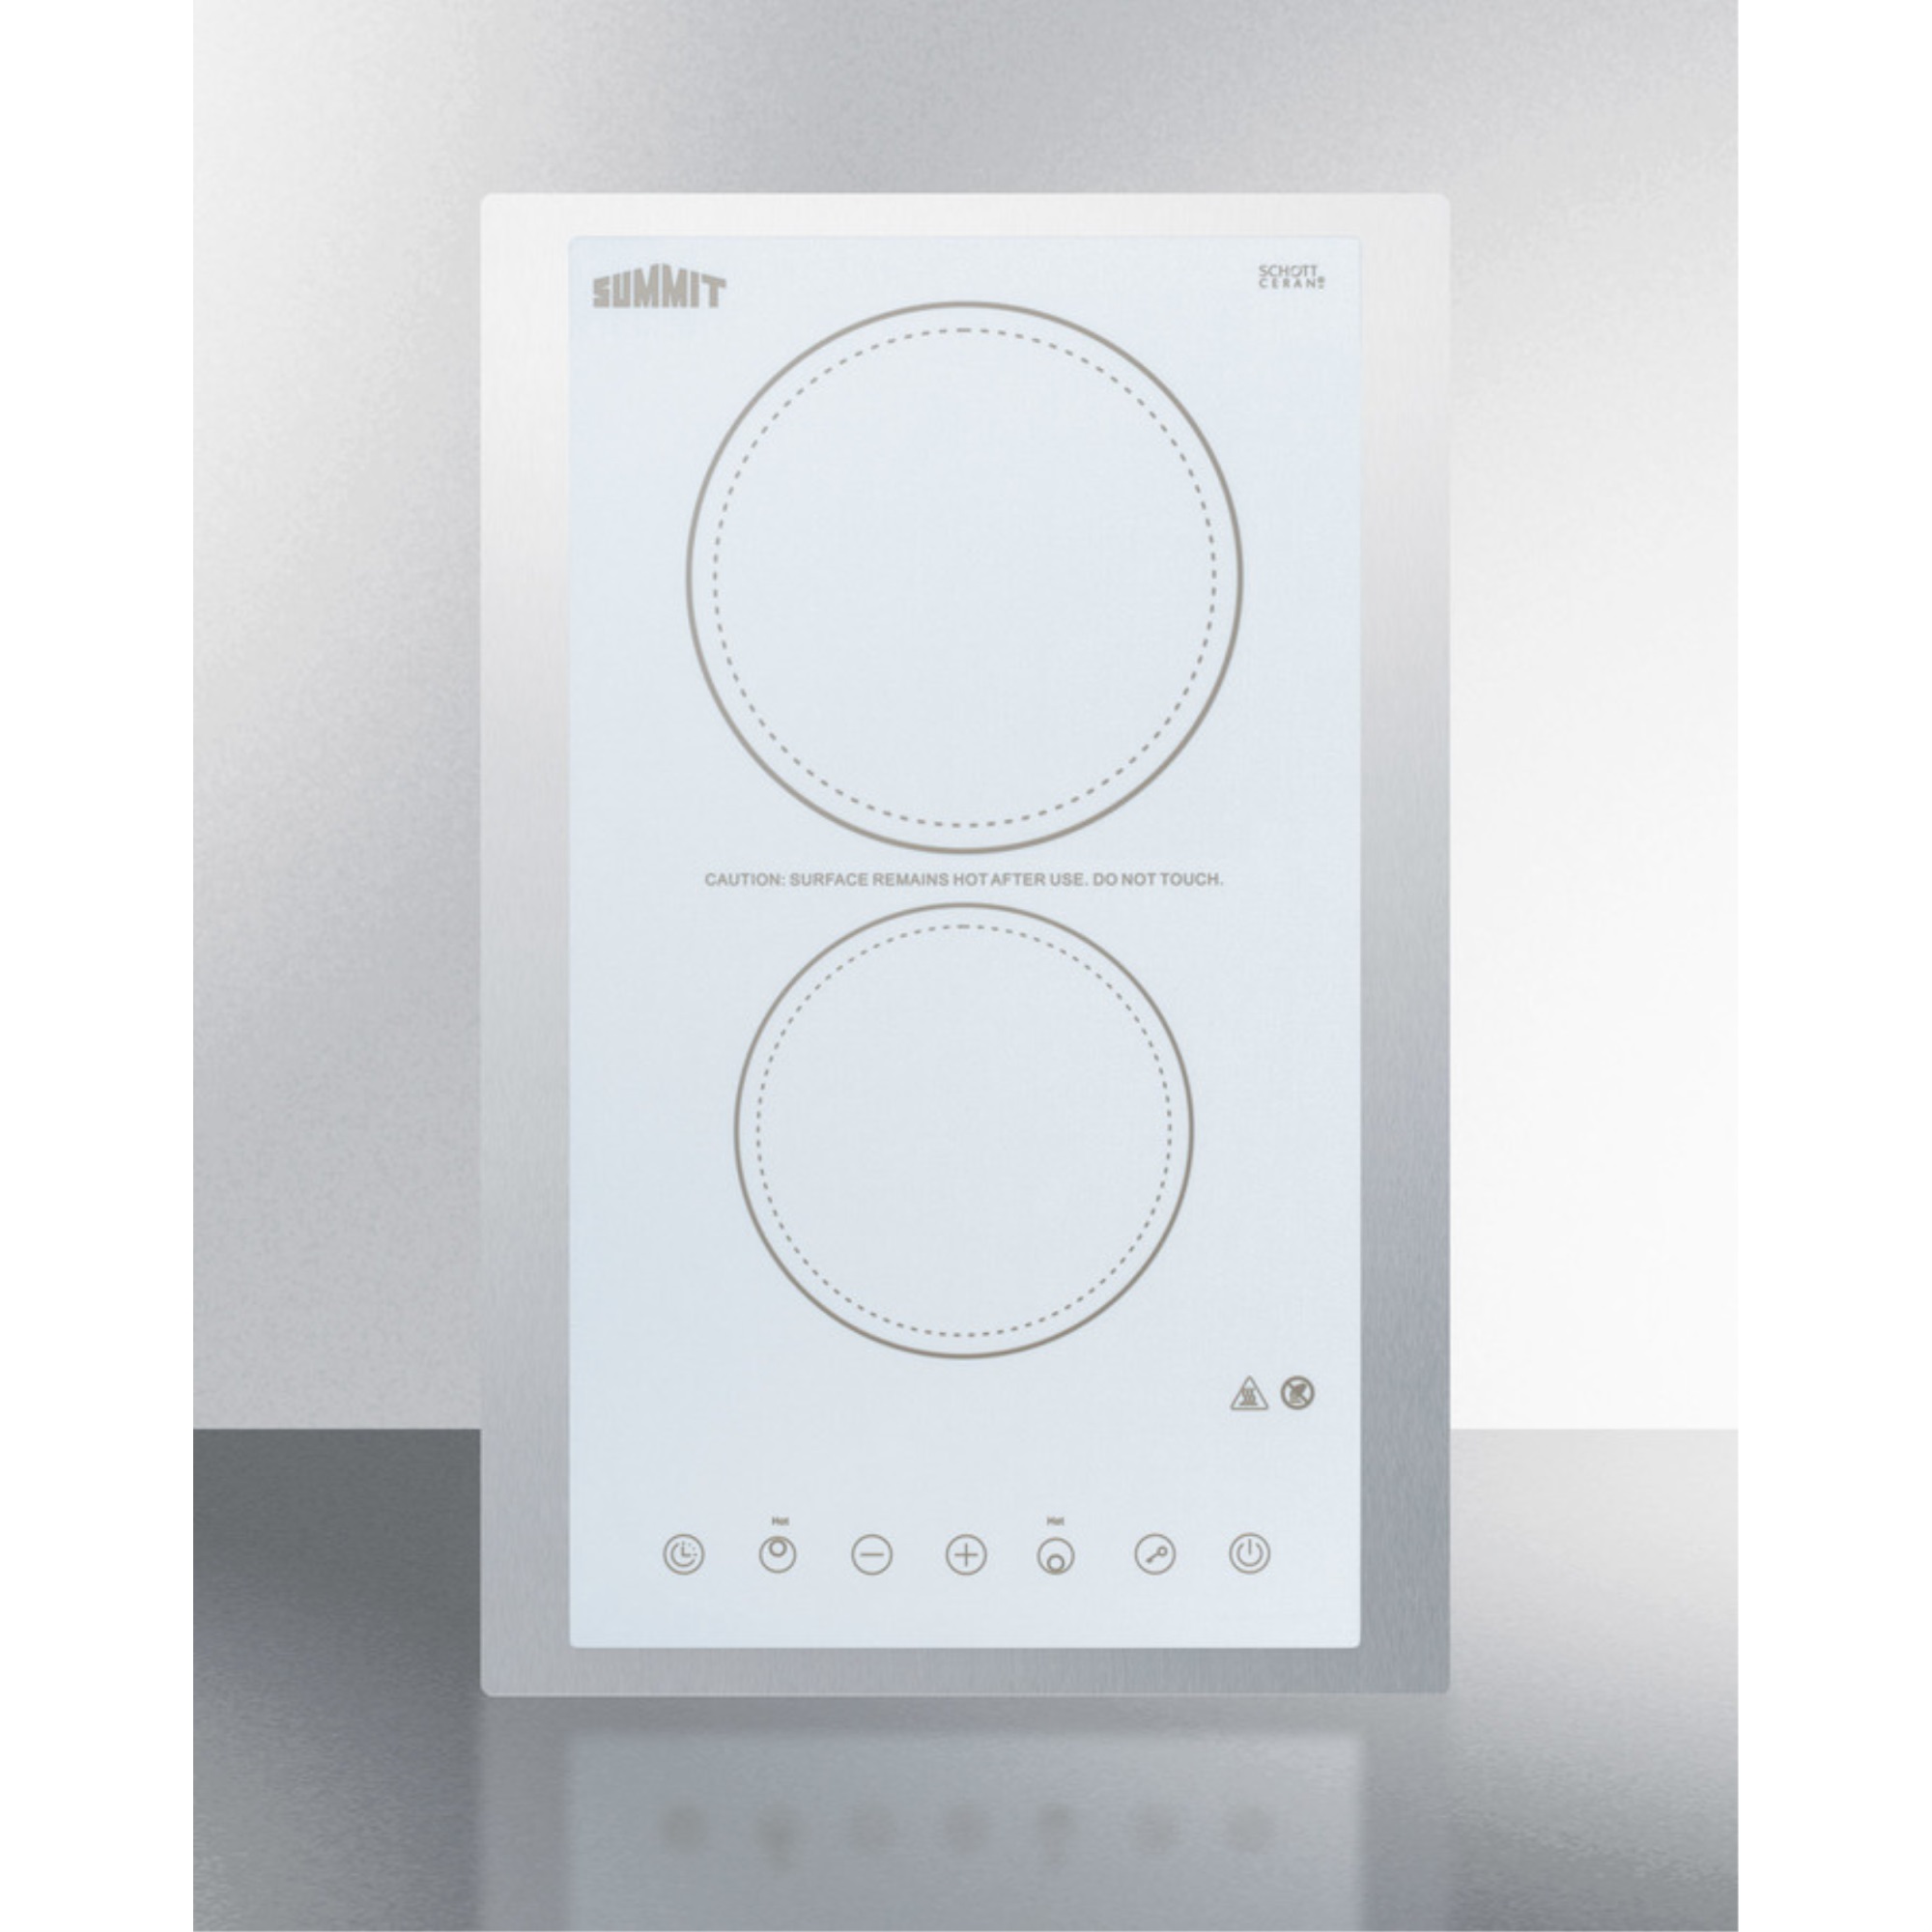 Summit 230V 2-burner cooktop in white ceramic Schott glass with digital touch controls and stainless steel frame to allow installatio